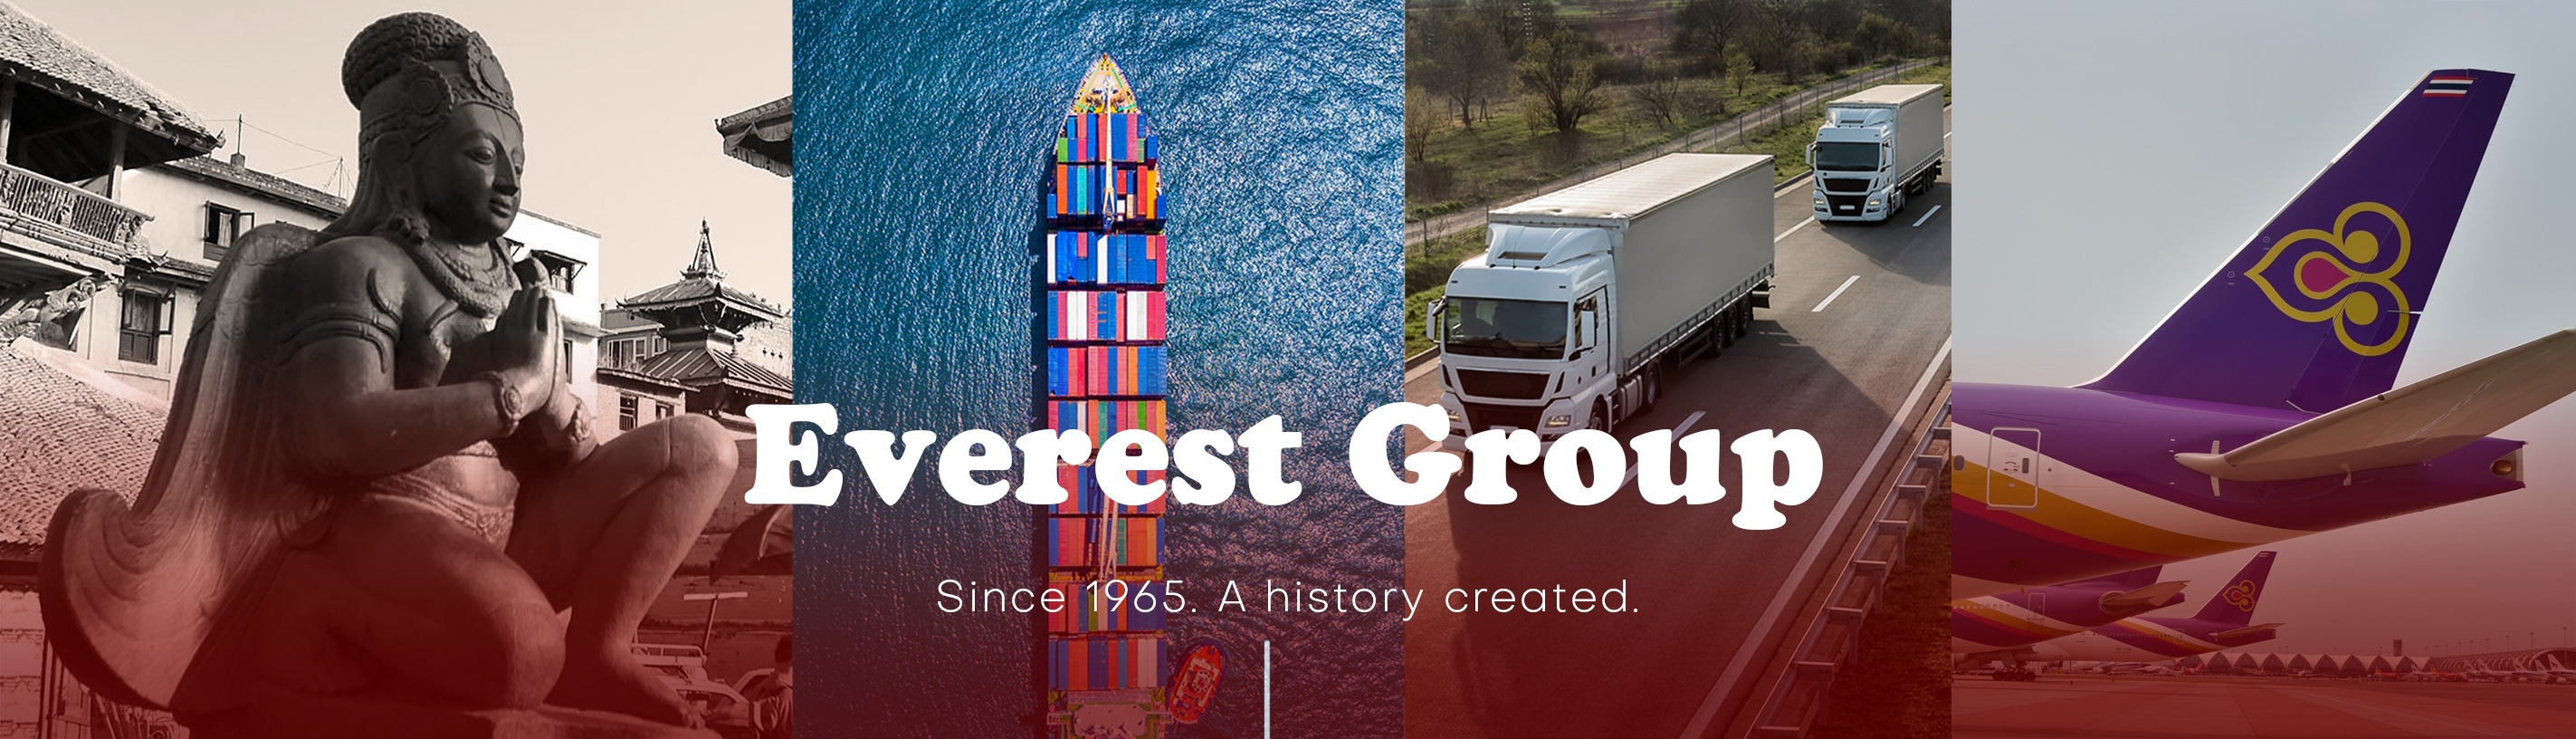 Everest Group since 1965.